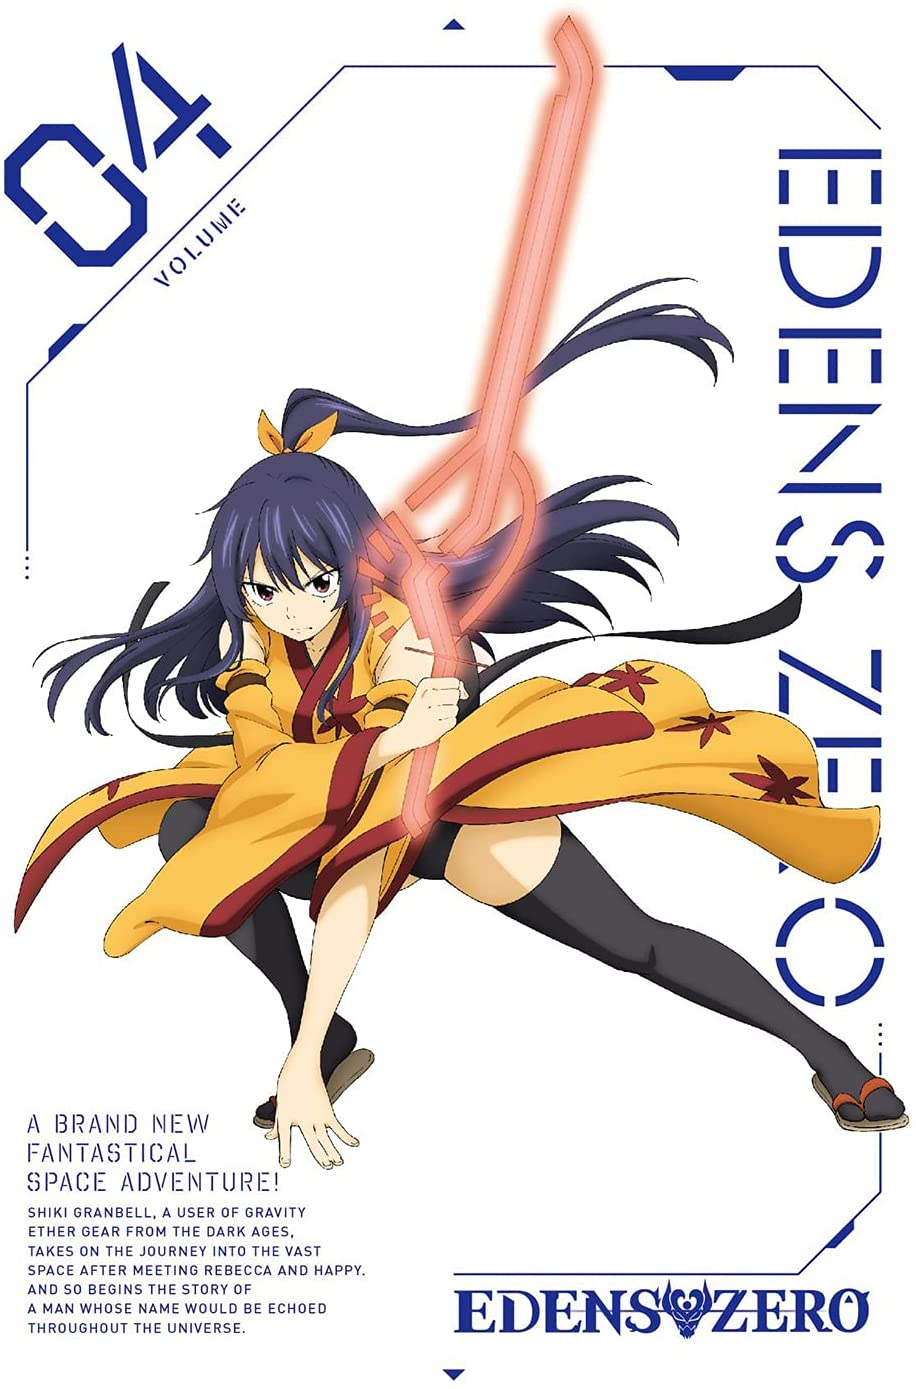 Edens Zero Season 2 Trailer Reveals More Cast and Opening Song by